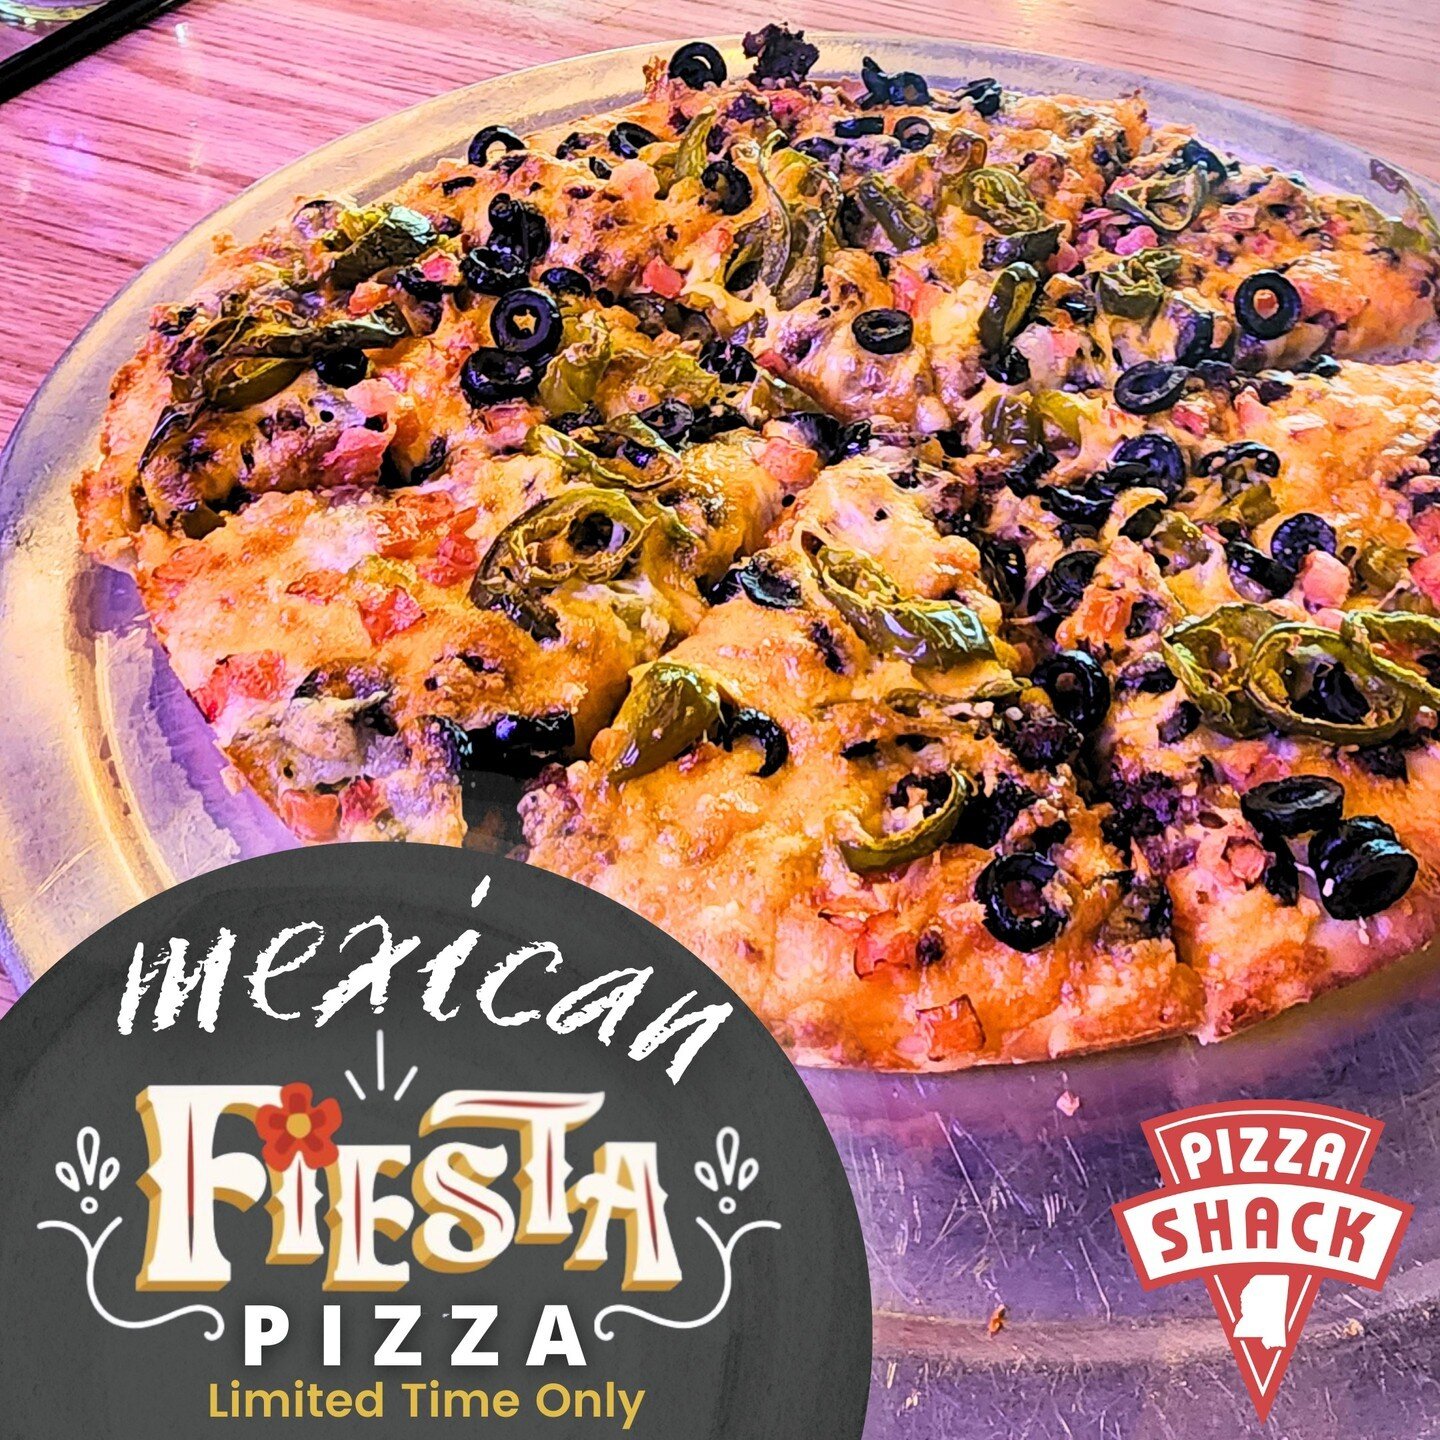 Happy Cinco De Mayo! Experience a taste of Mexico with our limited-time Mexican Fiesta Pizza 🌮🍕.

Loaded with picante sauce, seasoned beef, green chiles, jalape&ntilde;os, black olives, Doritos, diced tomato, cheddar and Monterey jack cheese, this 